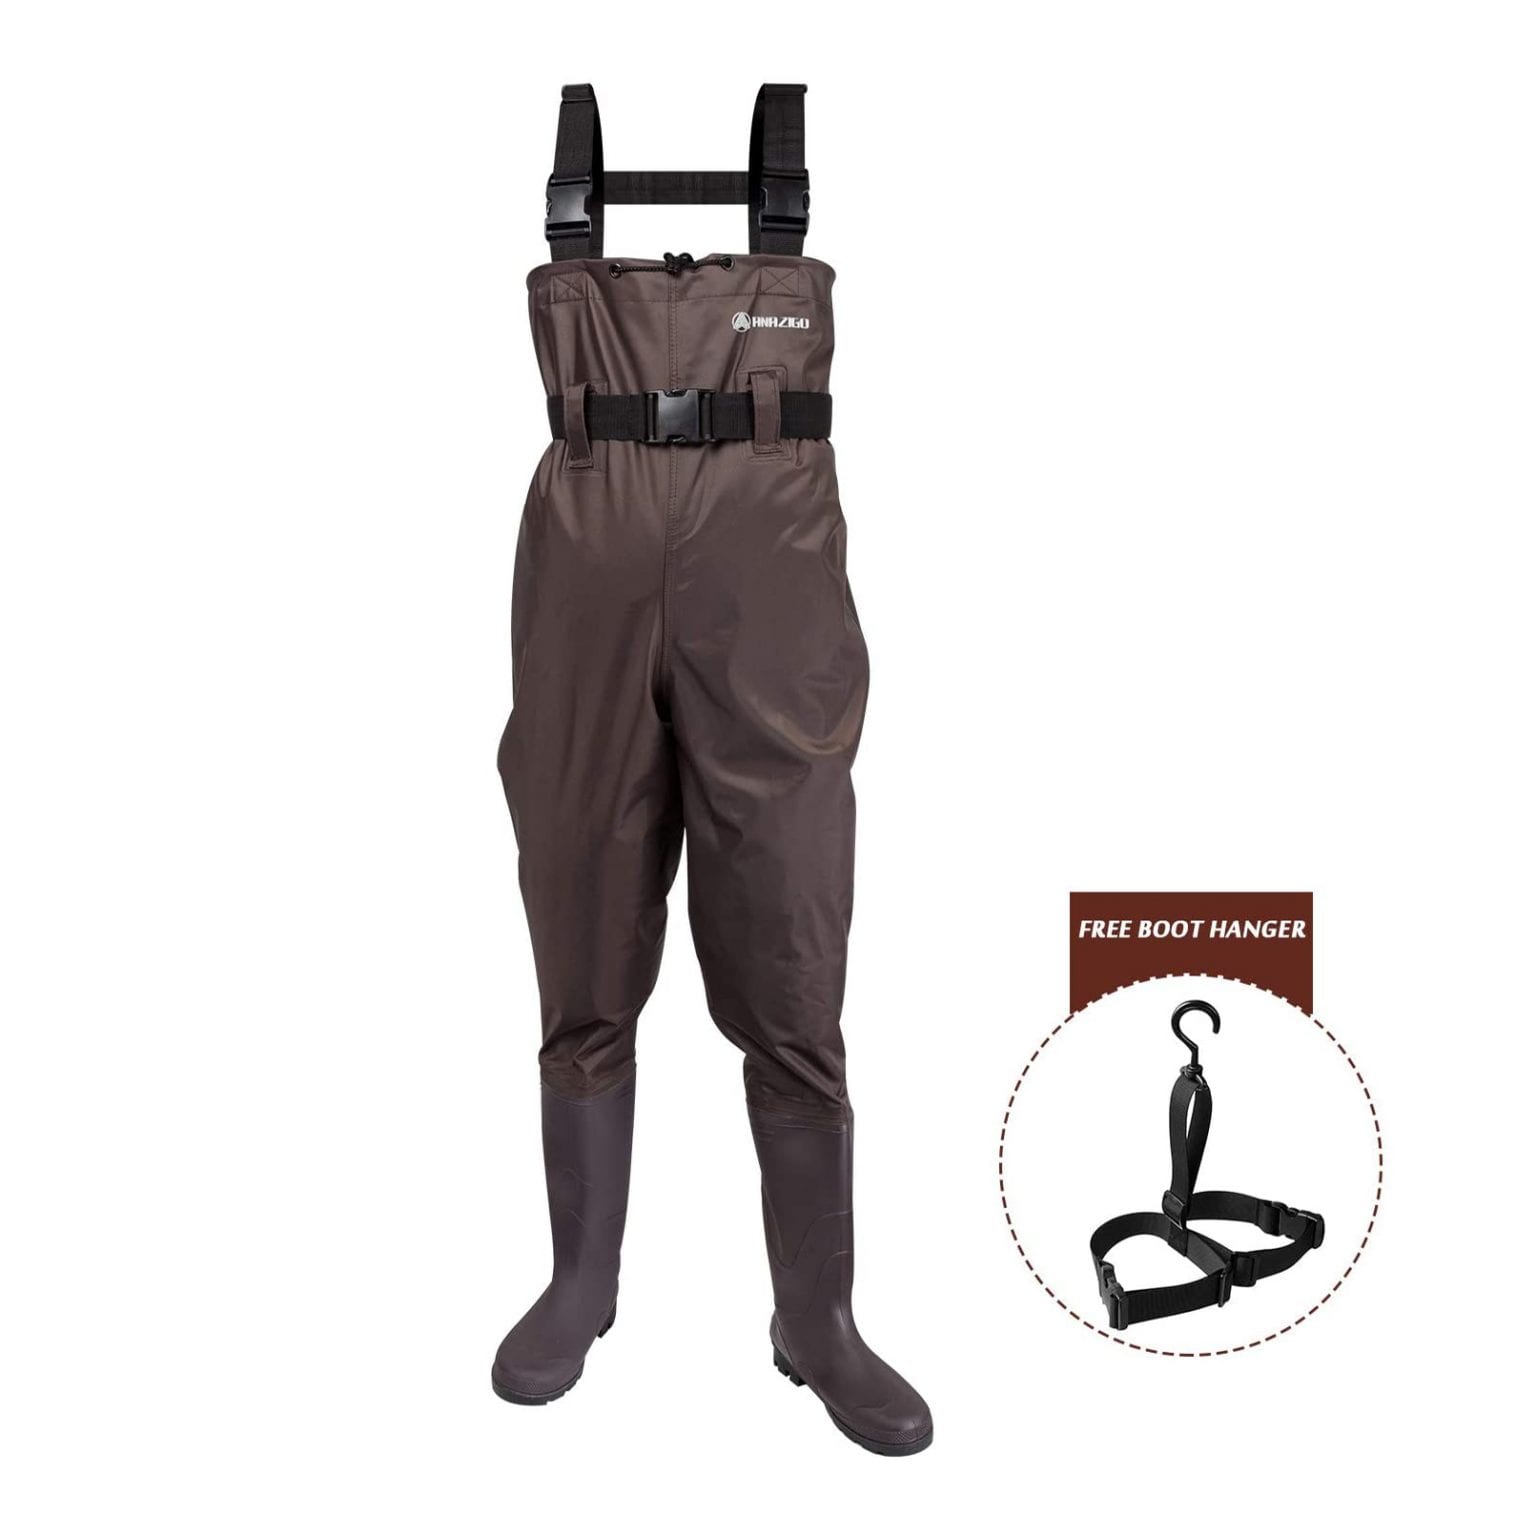 The 10 Best Chest Waders in 2021 Reviews - Go On Product